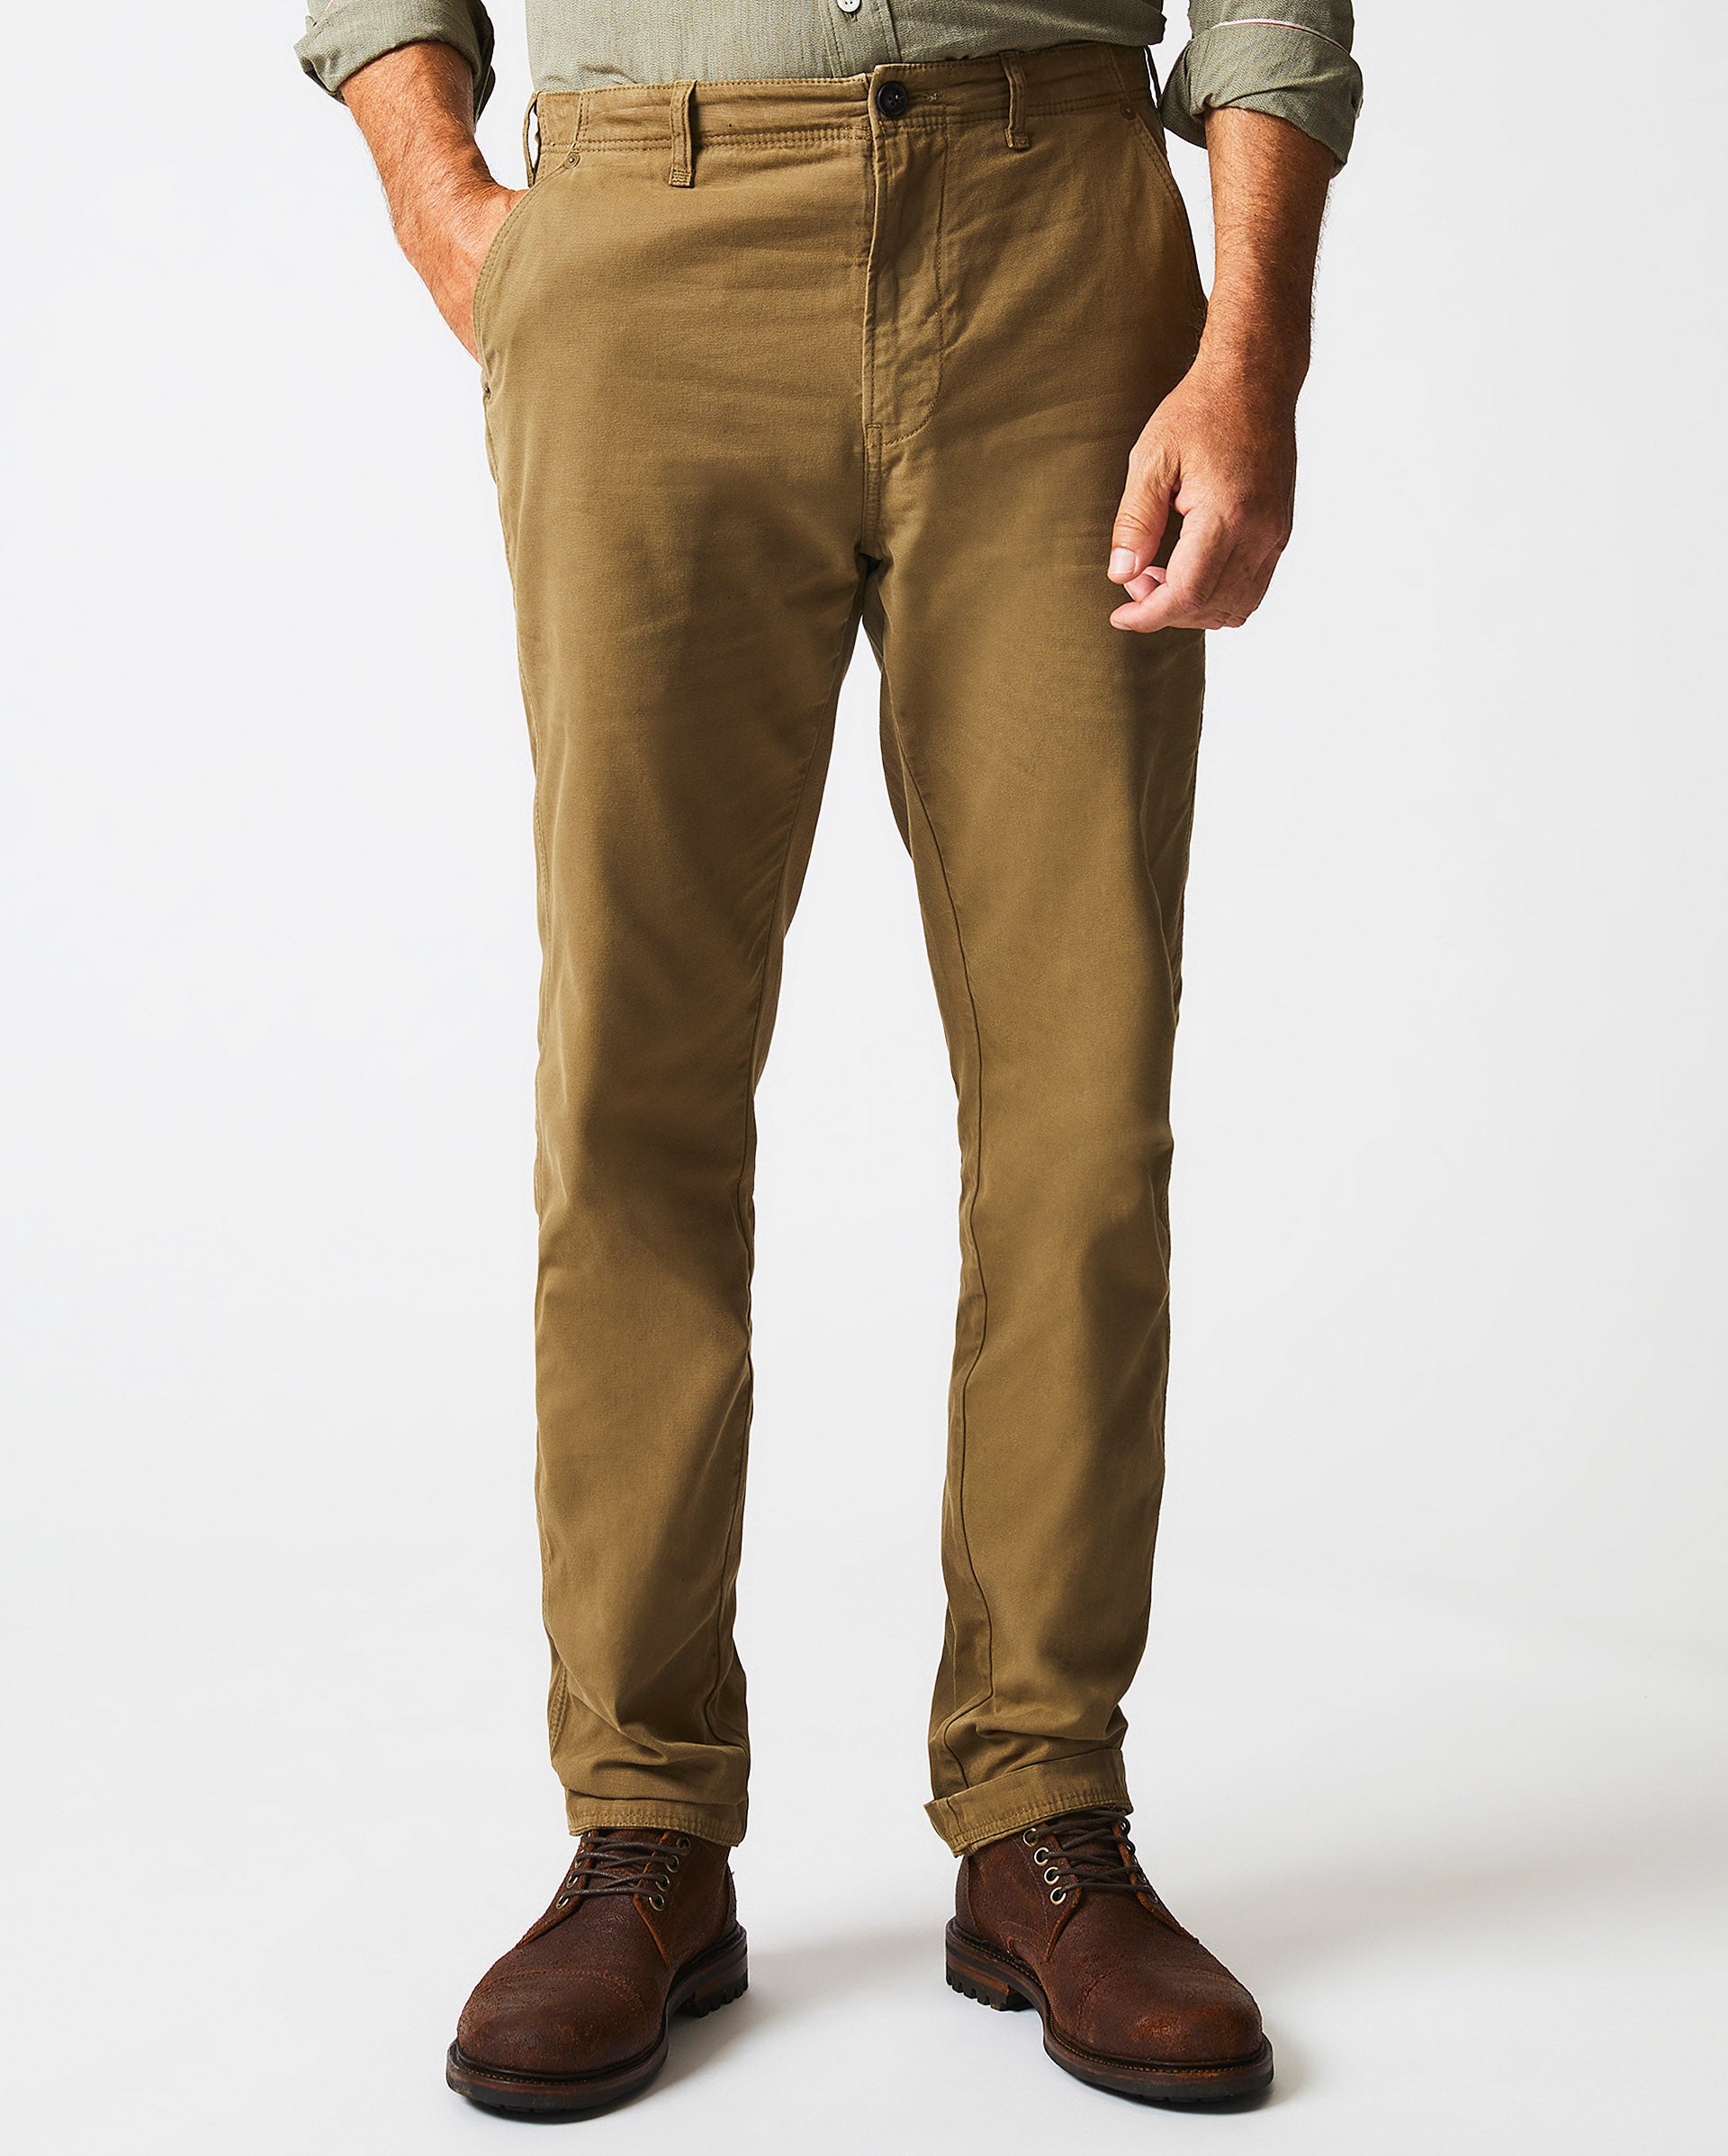 Difference Between Khakis and Chinos | Khaki vs. Chinos | Khaki pants  outfit men, Chino pants men, Pants outfit men